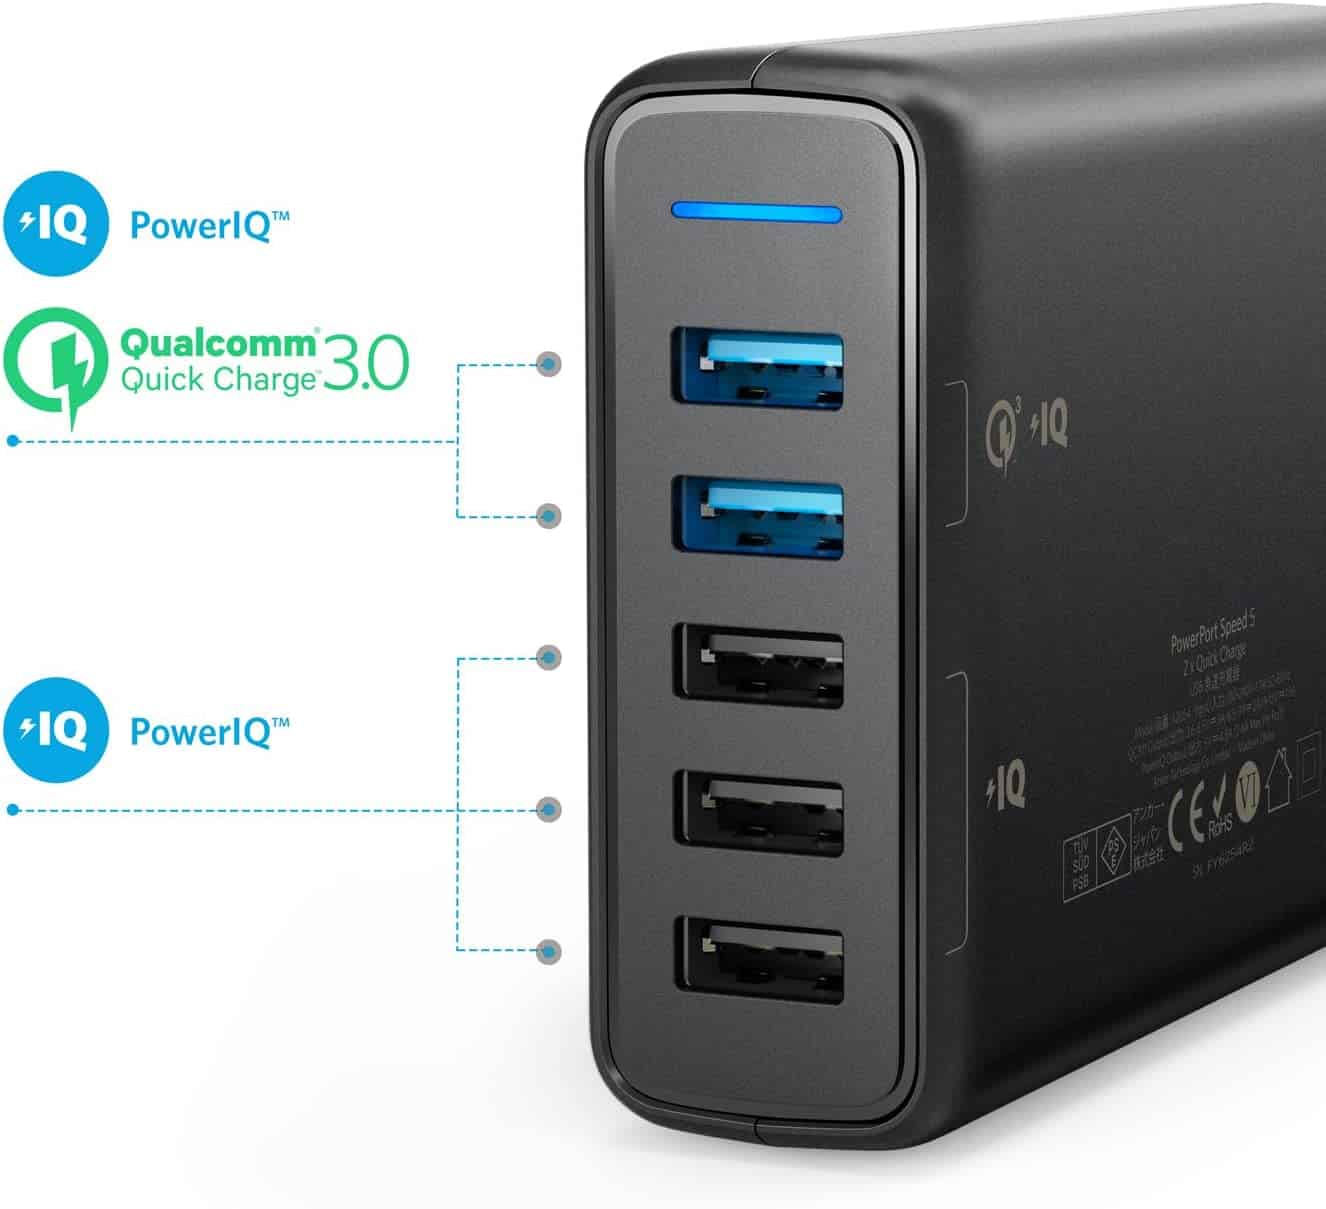 anker quick charge 3.0